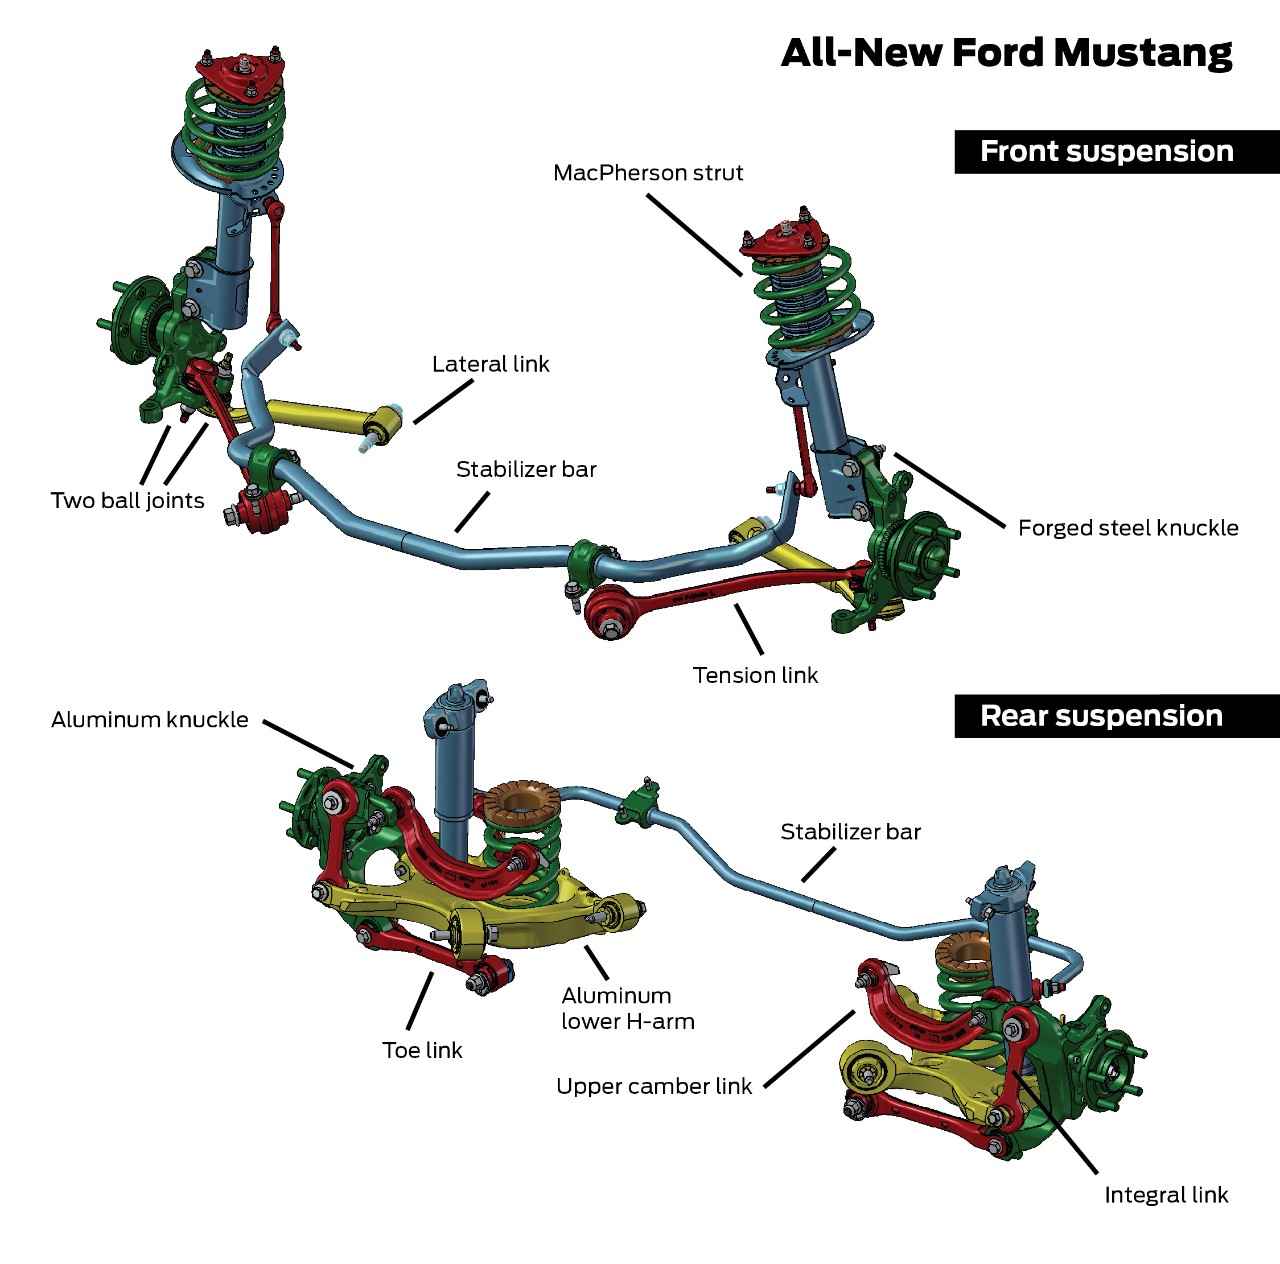 2015 Ford Mustang suspension